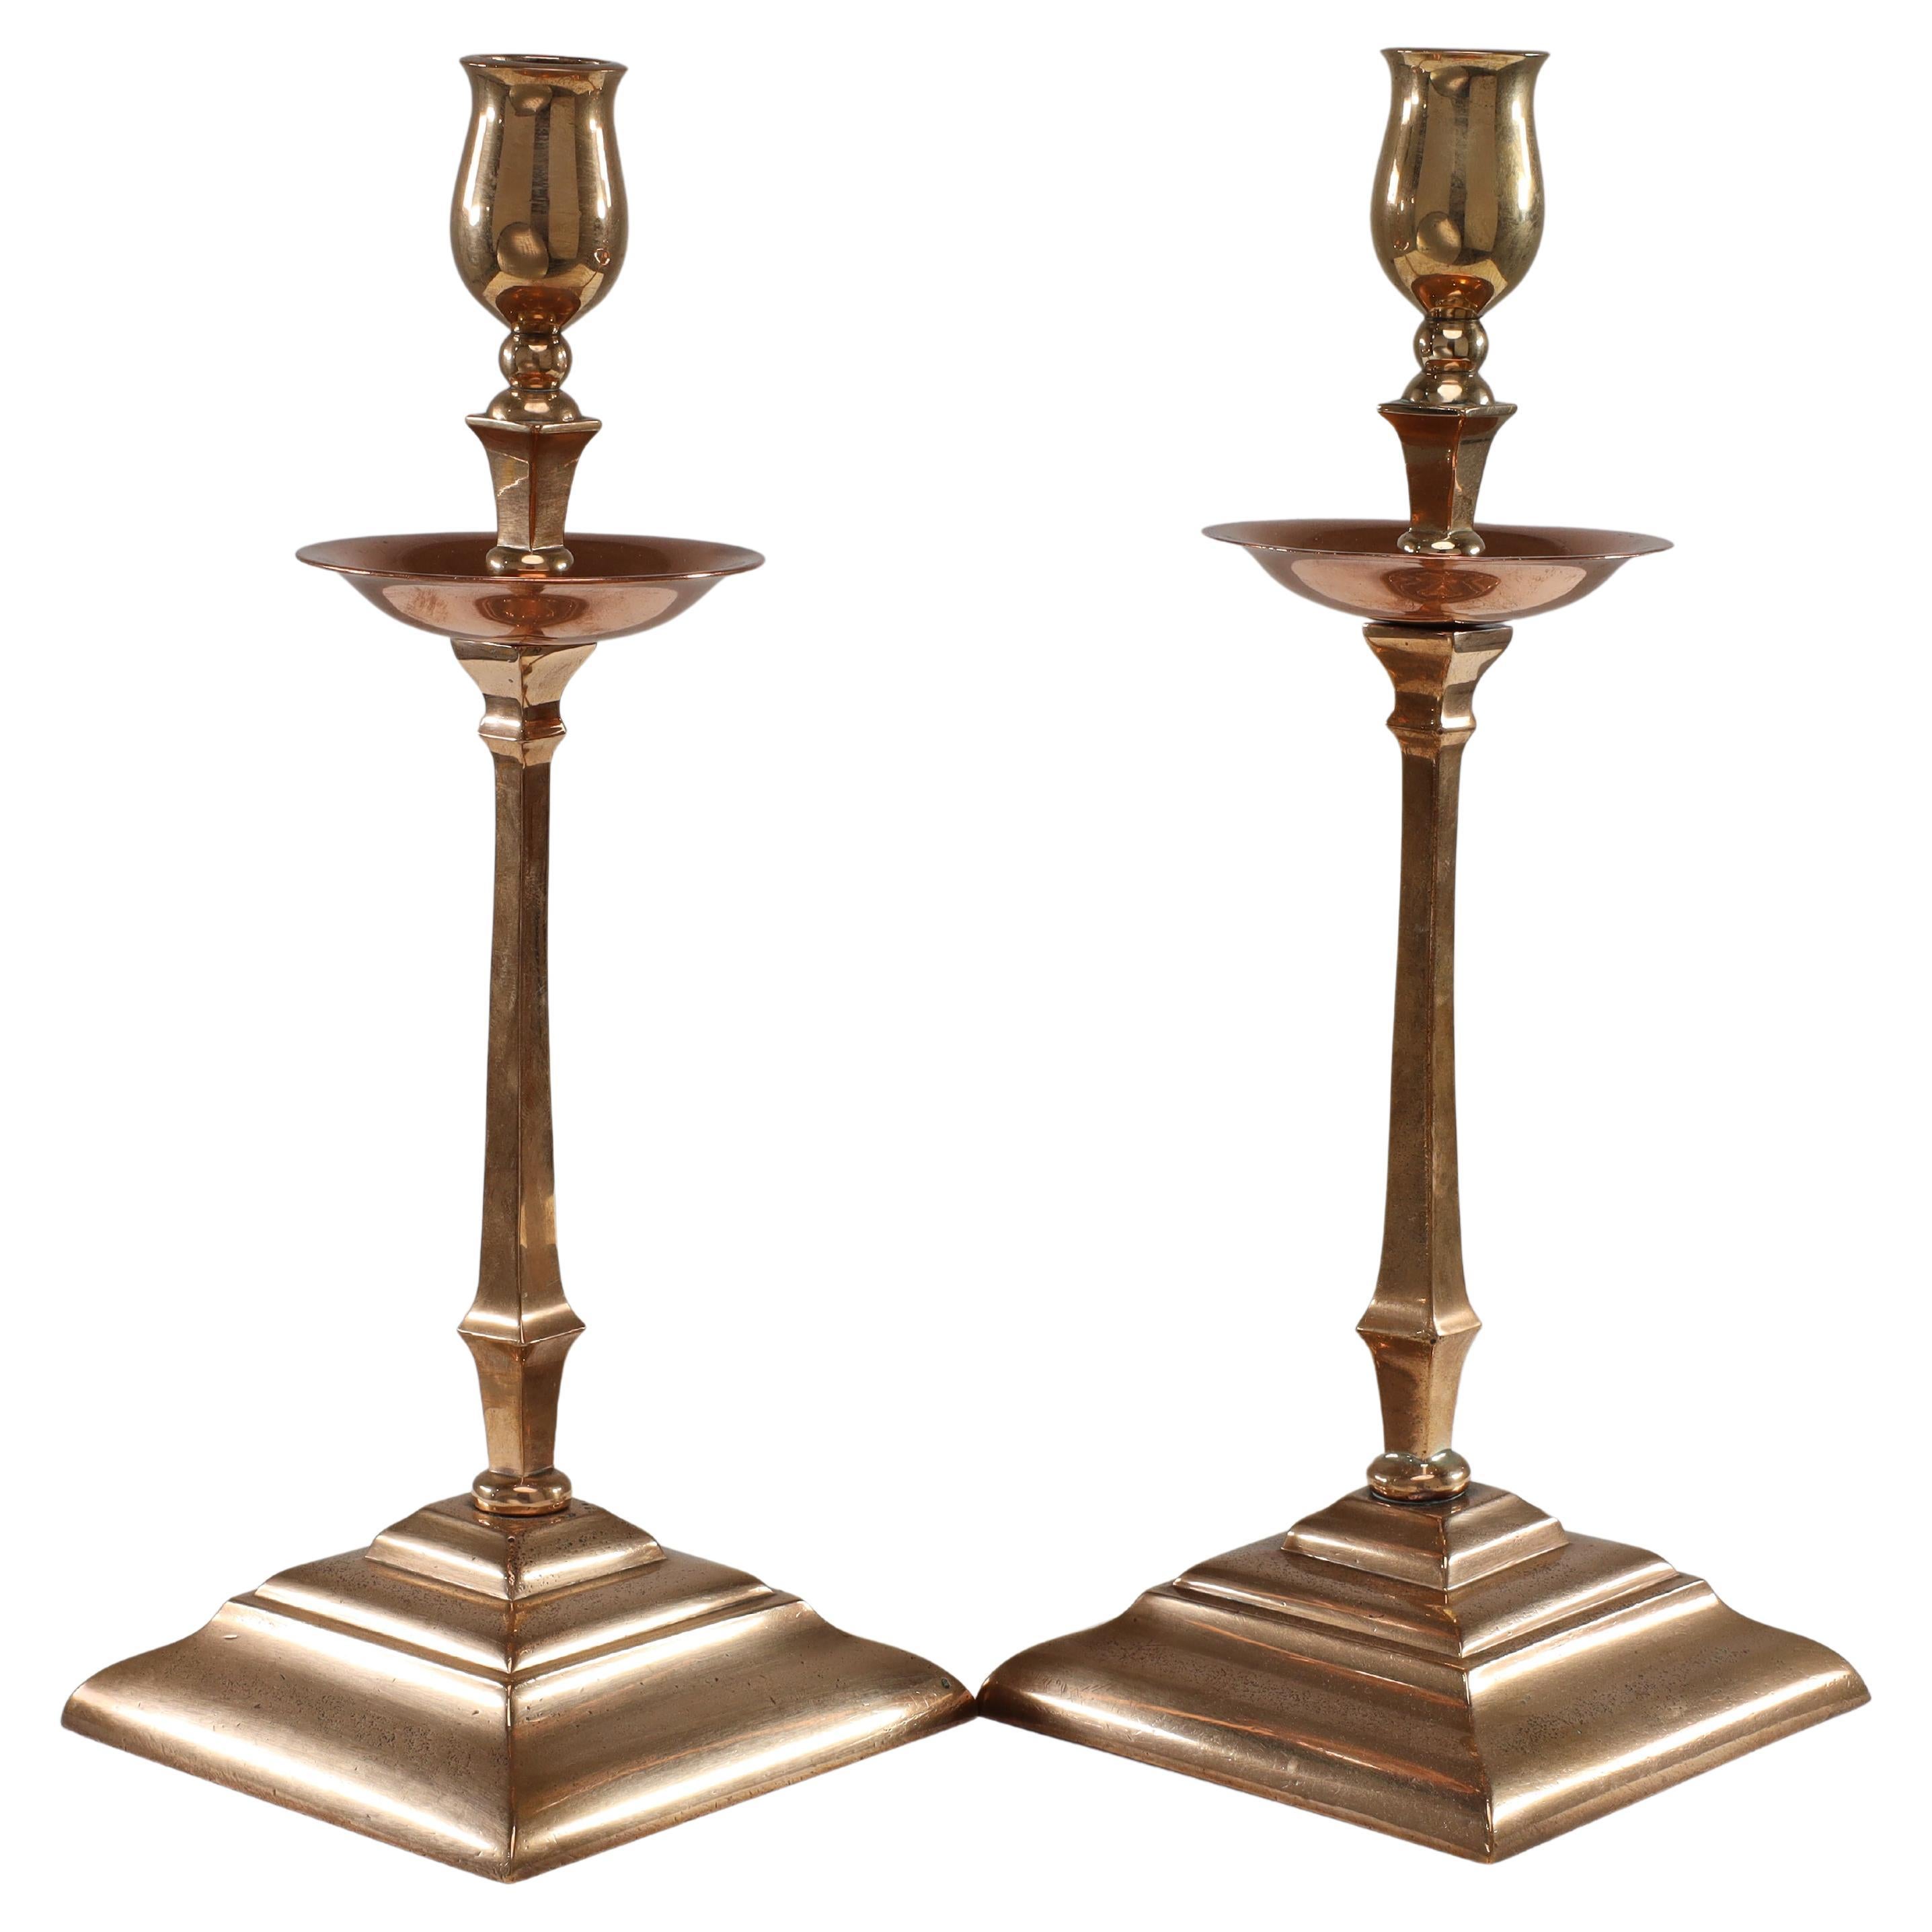 WAS Benson. A pair of Arts and Crafts brass and copper candlesticks